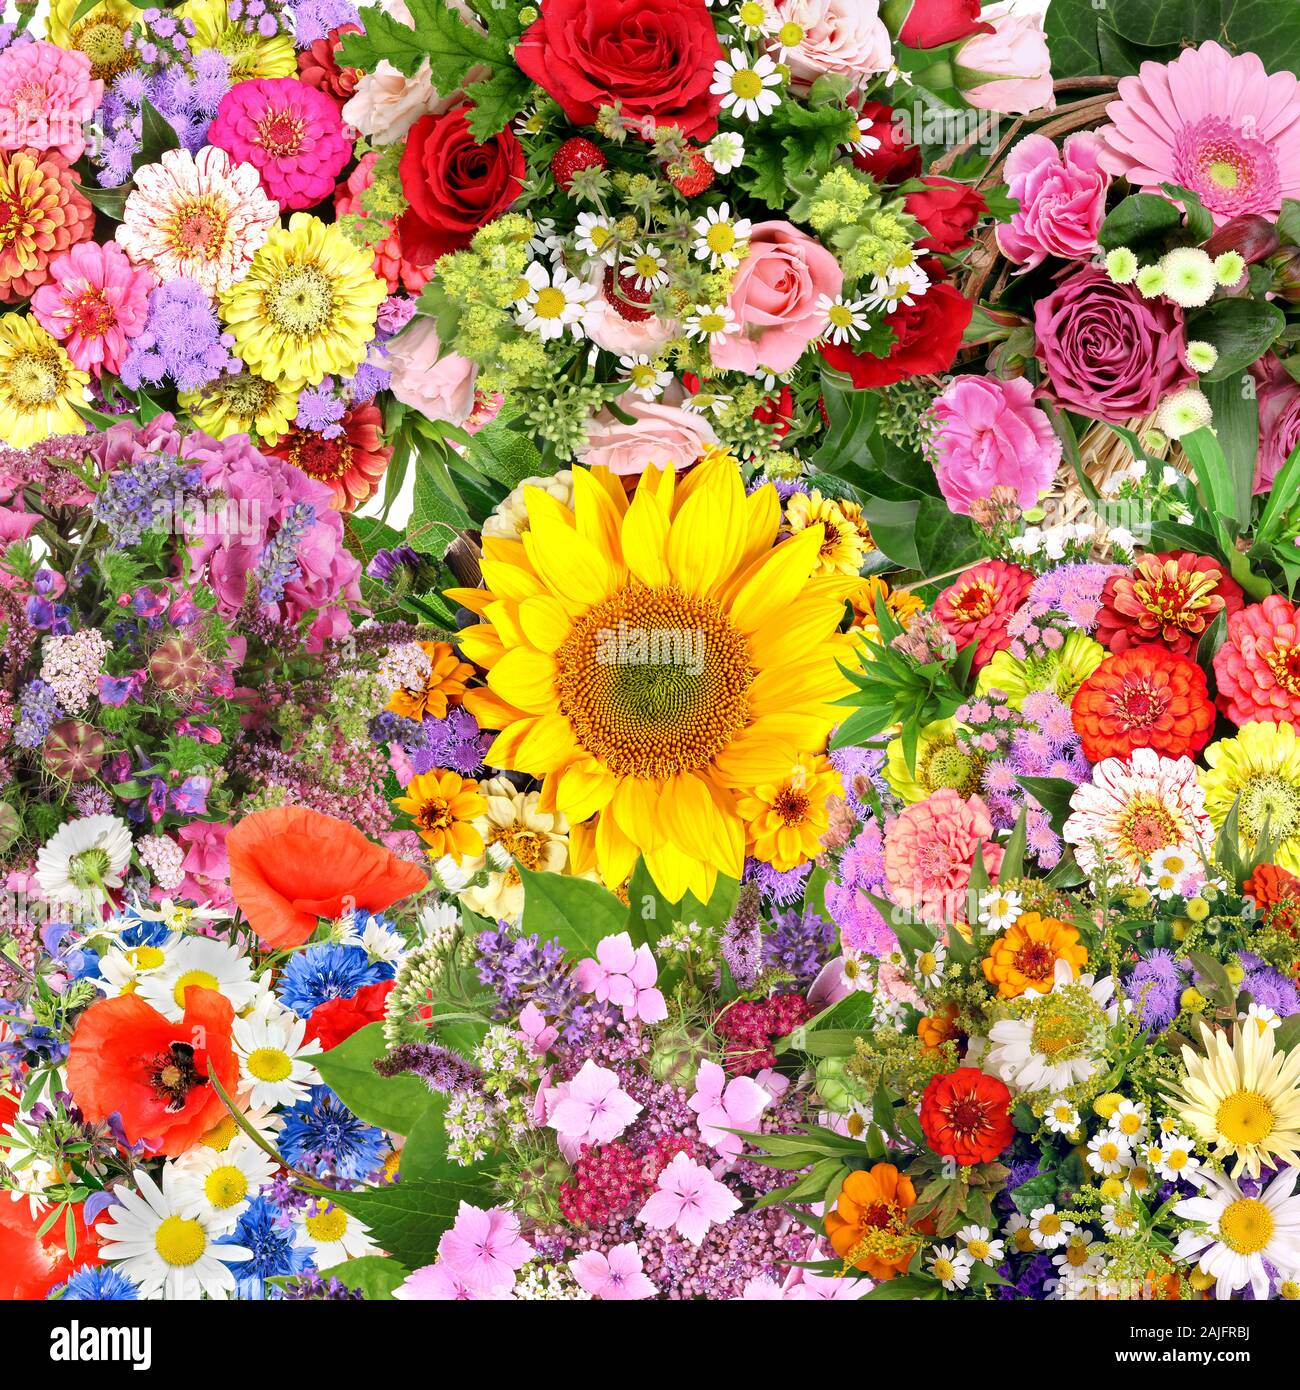 Different colorful flower bouquets Stock Photo - Alamy